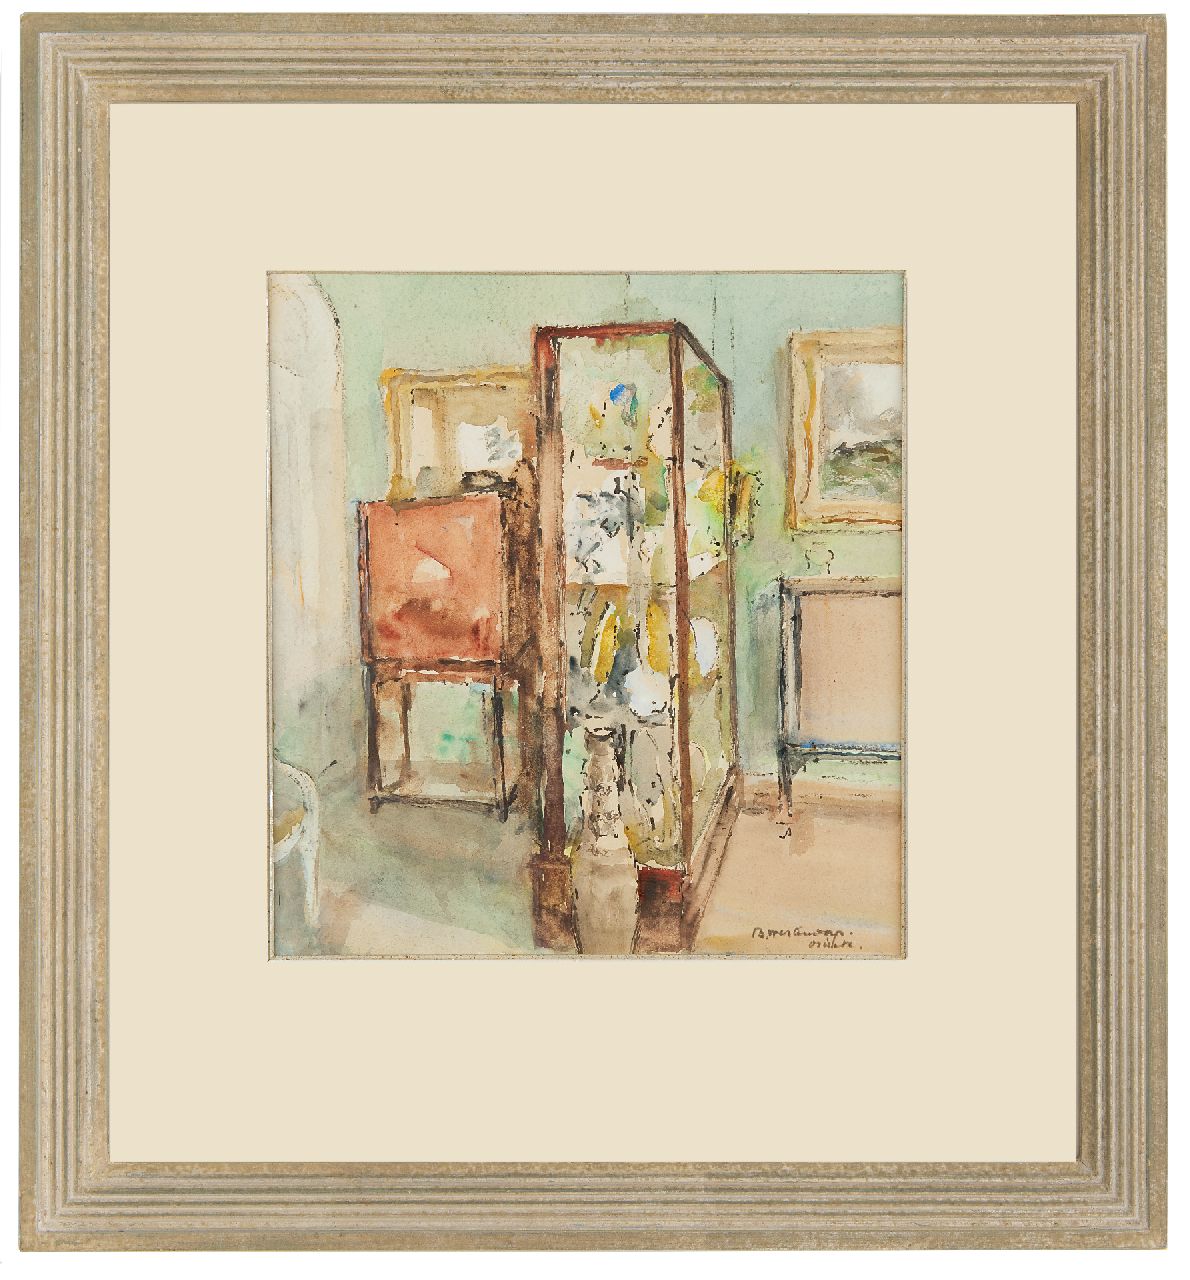 Westendorp-Osieck J.E.  | Johanna Elisabeth 'Betsy' Westendorp-Osieck | Watercolours and drawings offered for sale | Interior with a showcase, watercolour on paper 32.0 x 30.0 cm, signed l.r.